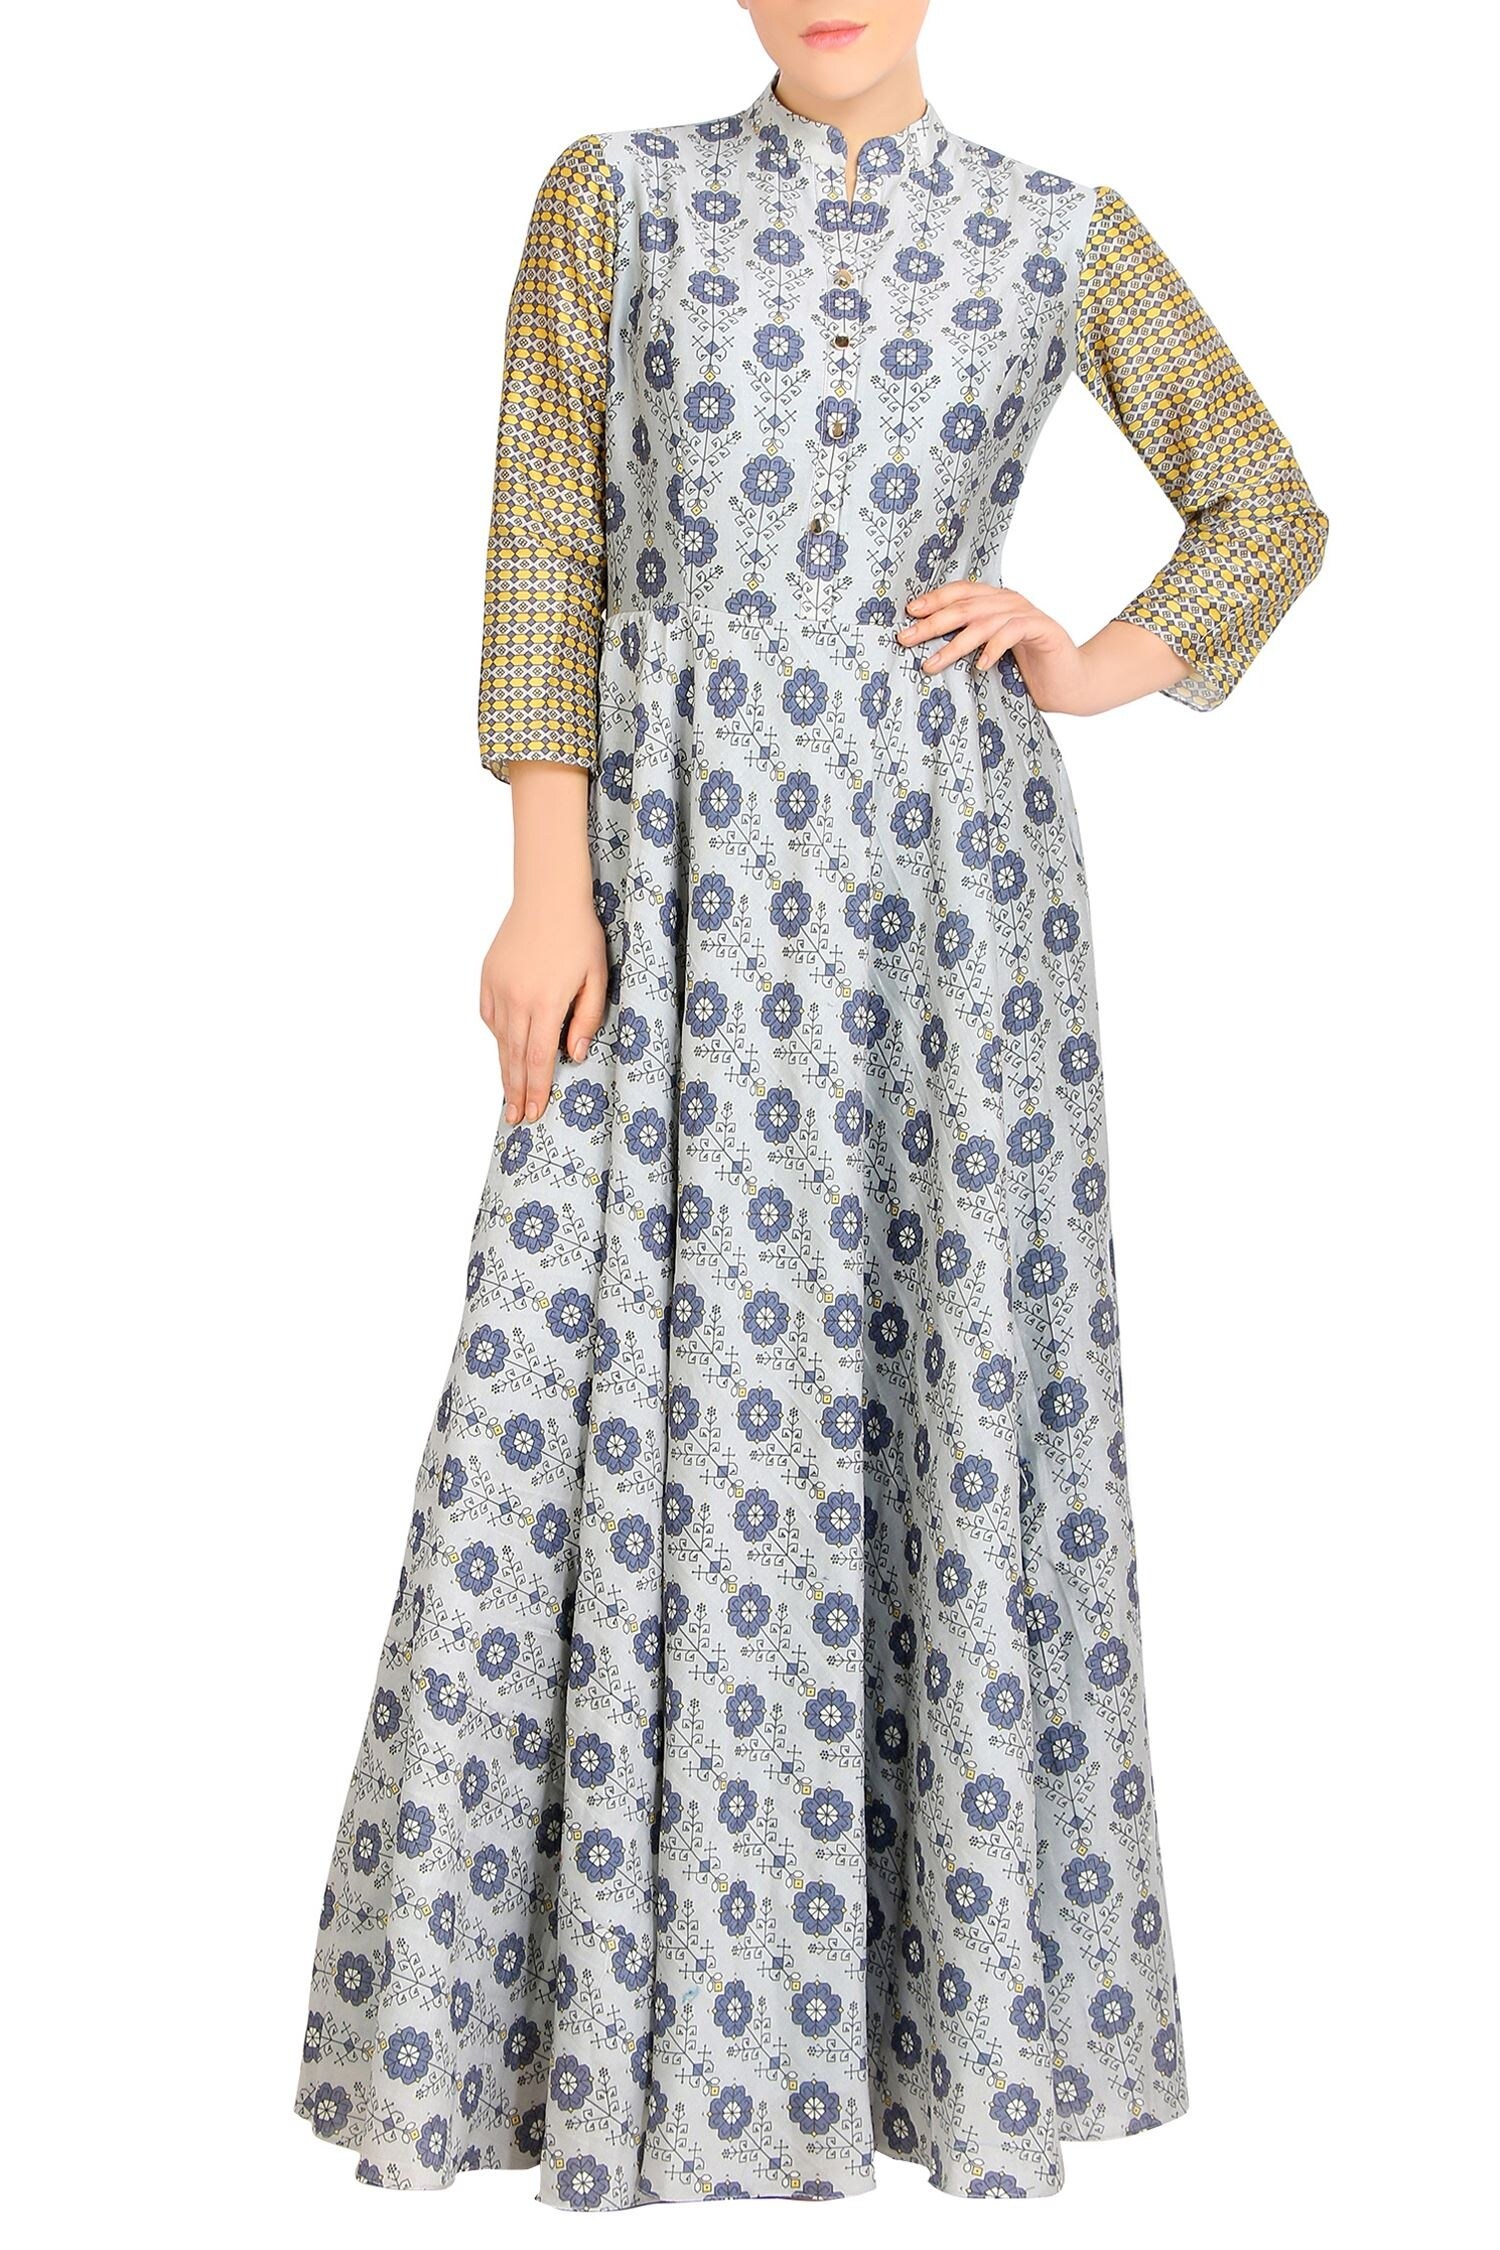 Soup by Sougat Paul Blue Printed Pleated Dress For Women